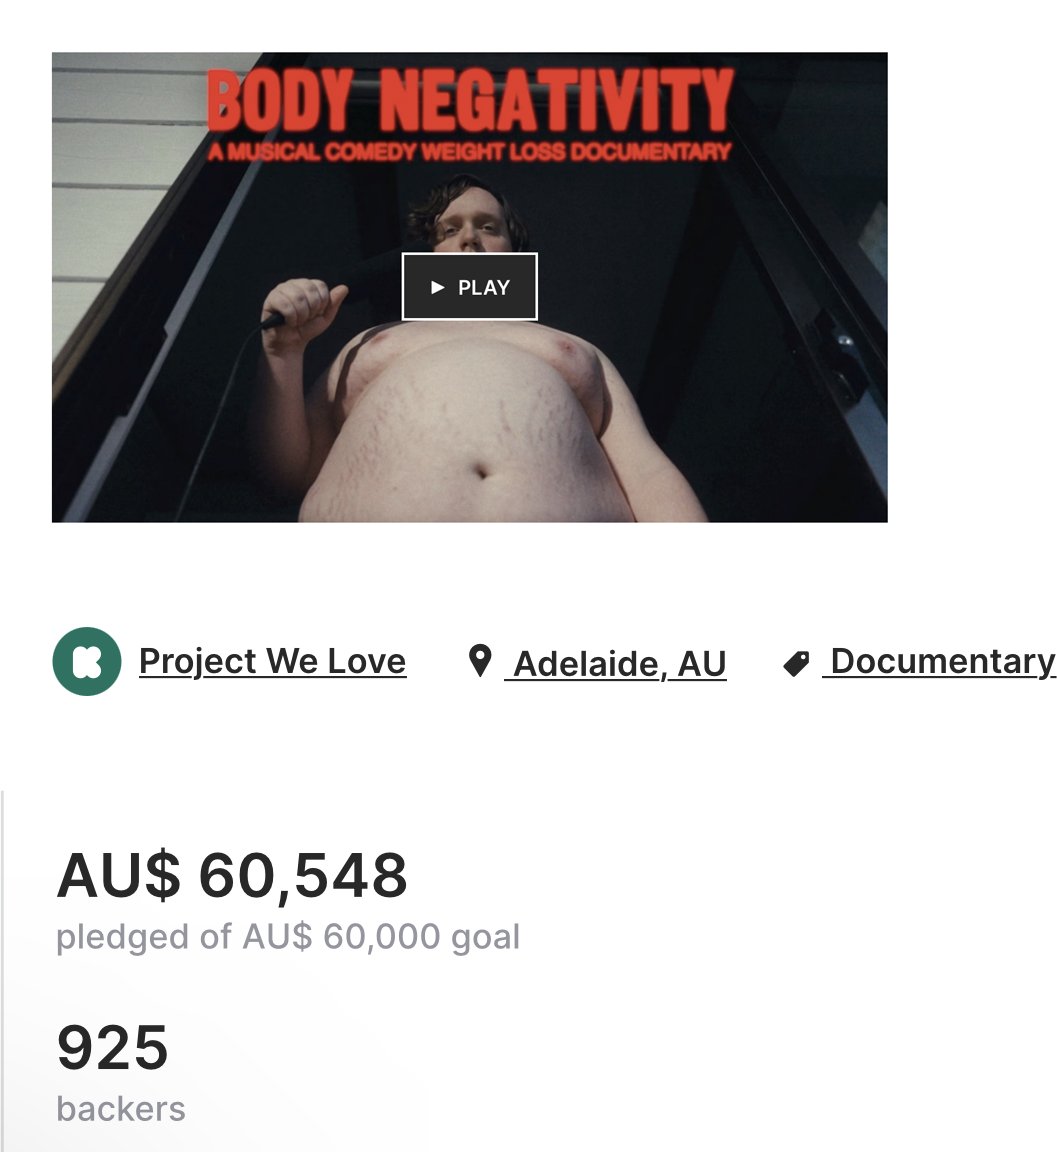 BadEmpanada raised more money for Gaza in a day than this Zionist loser raised for himself in a month to make a video about being fat! $65,808 USD (so far) vs AU$60,548 (~$39k USD). Donate below👇